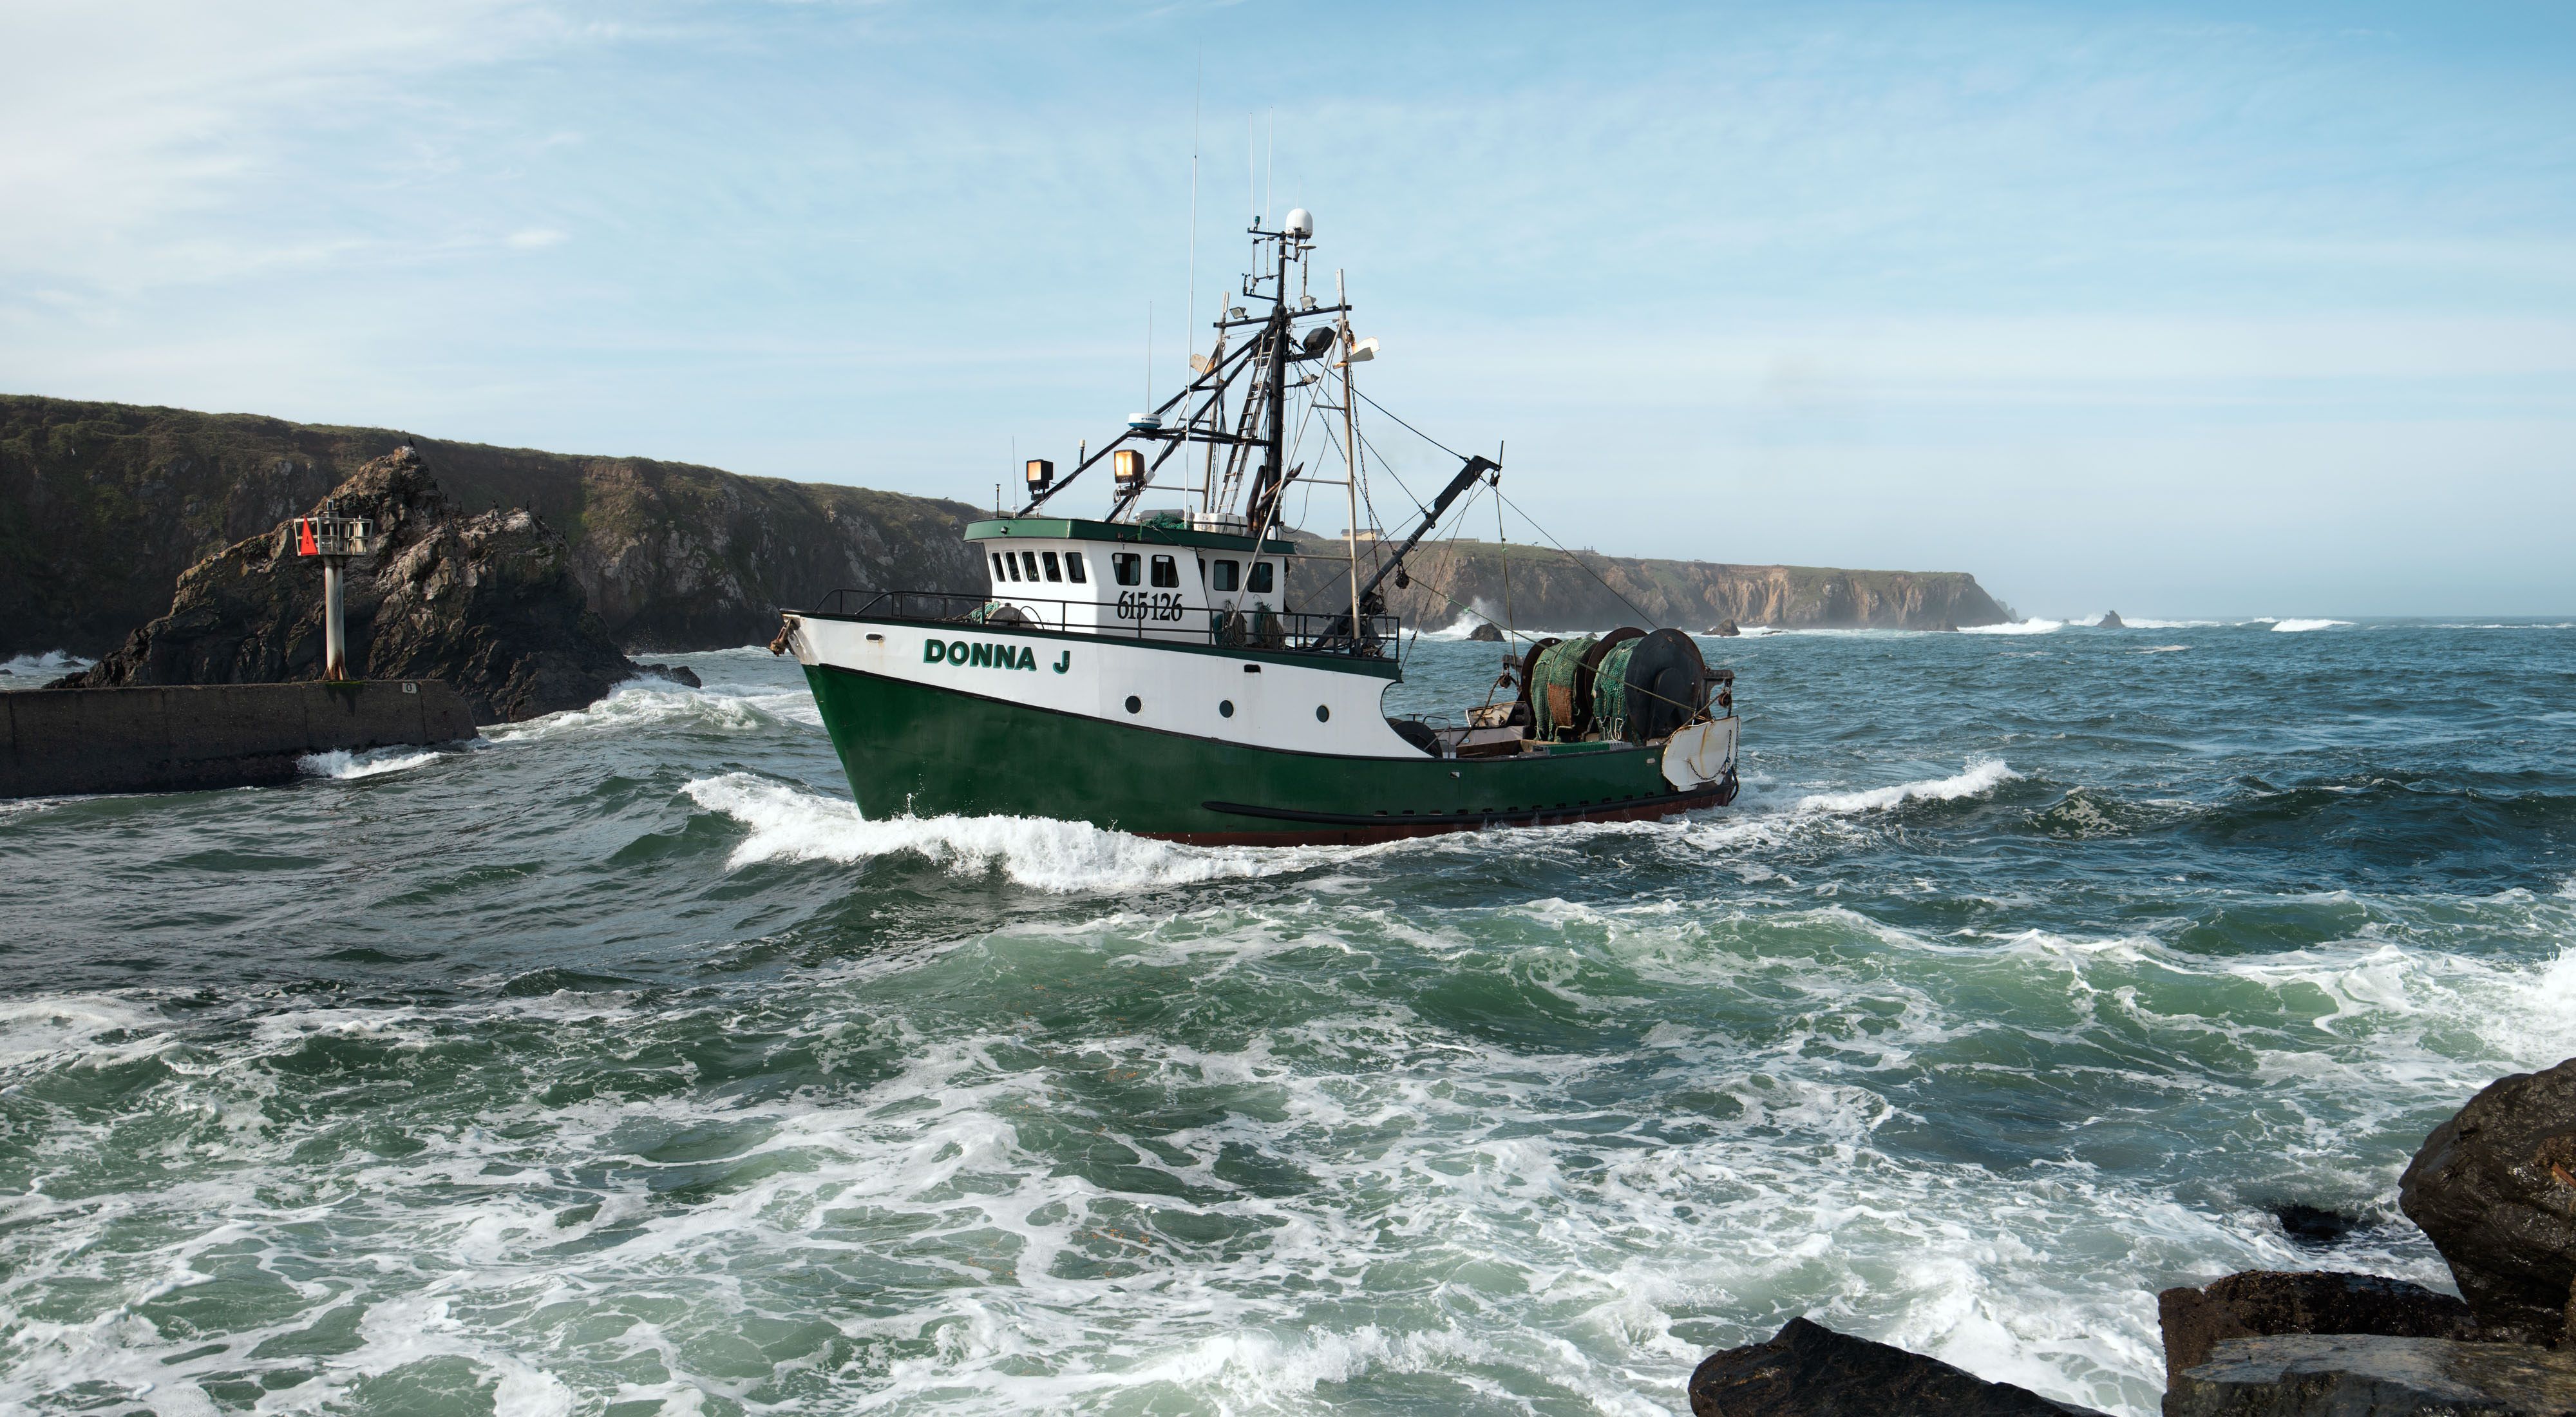 A green-and-white fishing boat named the Donna J motors into a rocky harbor on choppy seas.